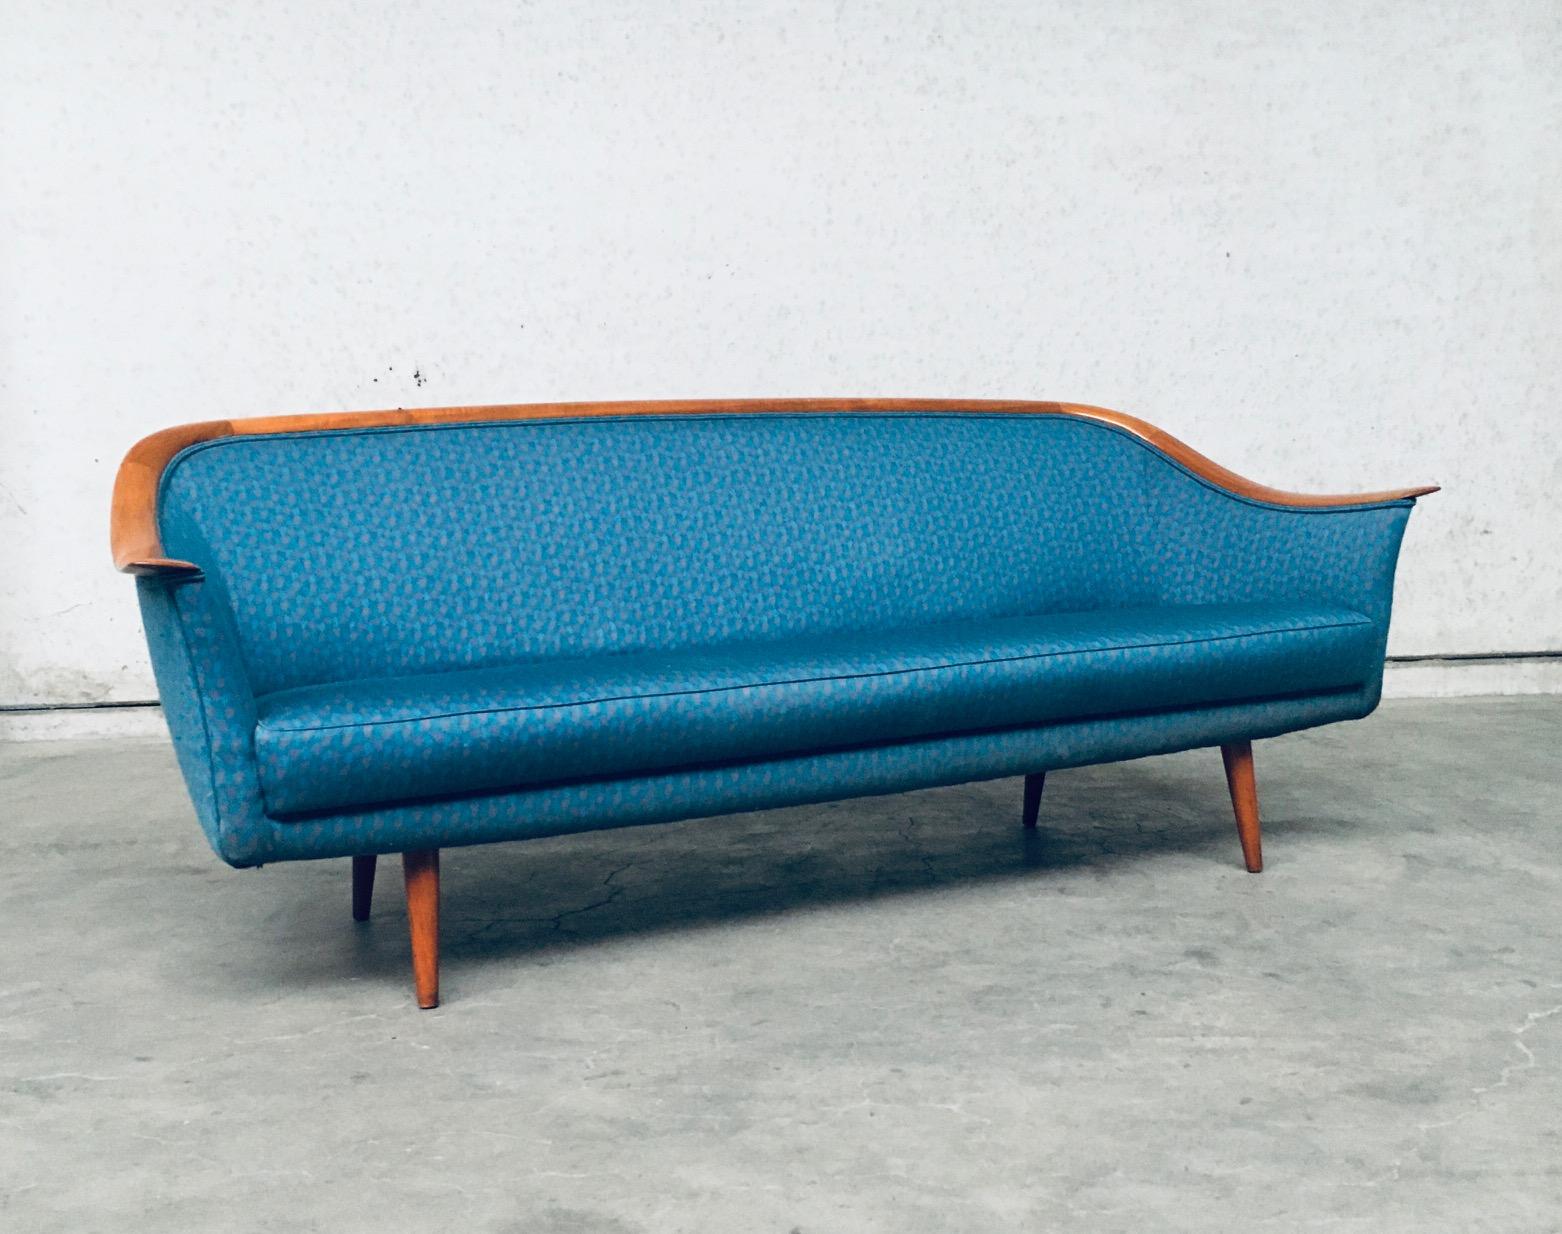 Vintage Mid-Century Modern scandinavian design 3 seat sofa by Dux, made in Denmark 1960's. Well designed and formed three seater sofa. Teak wood formed and bend arm and back top rest with a more recent 1980's blue fabric on 4 legs. This 3 seat sofa